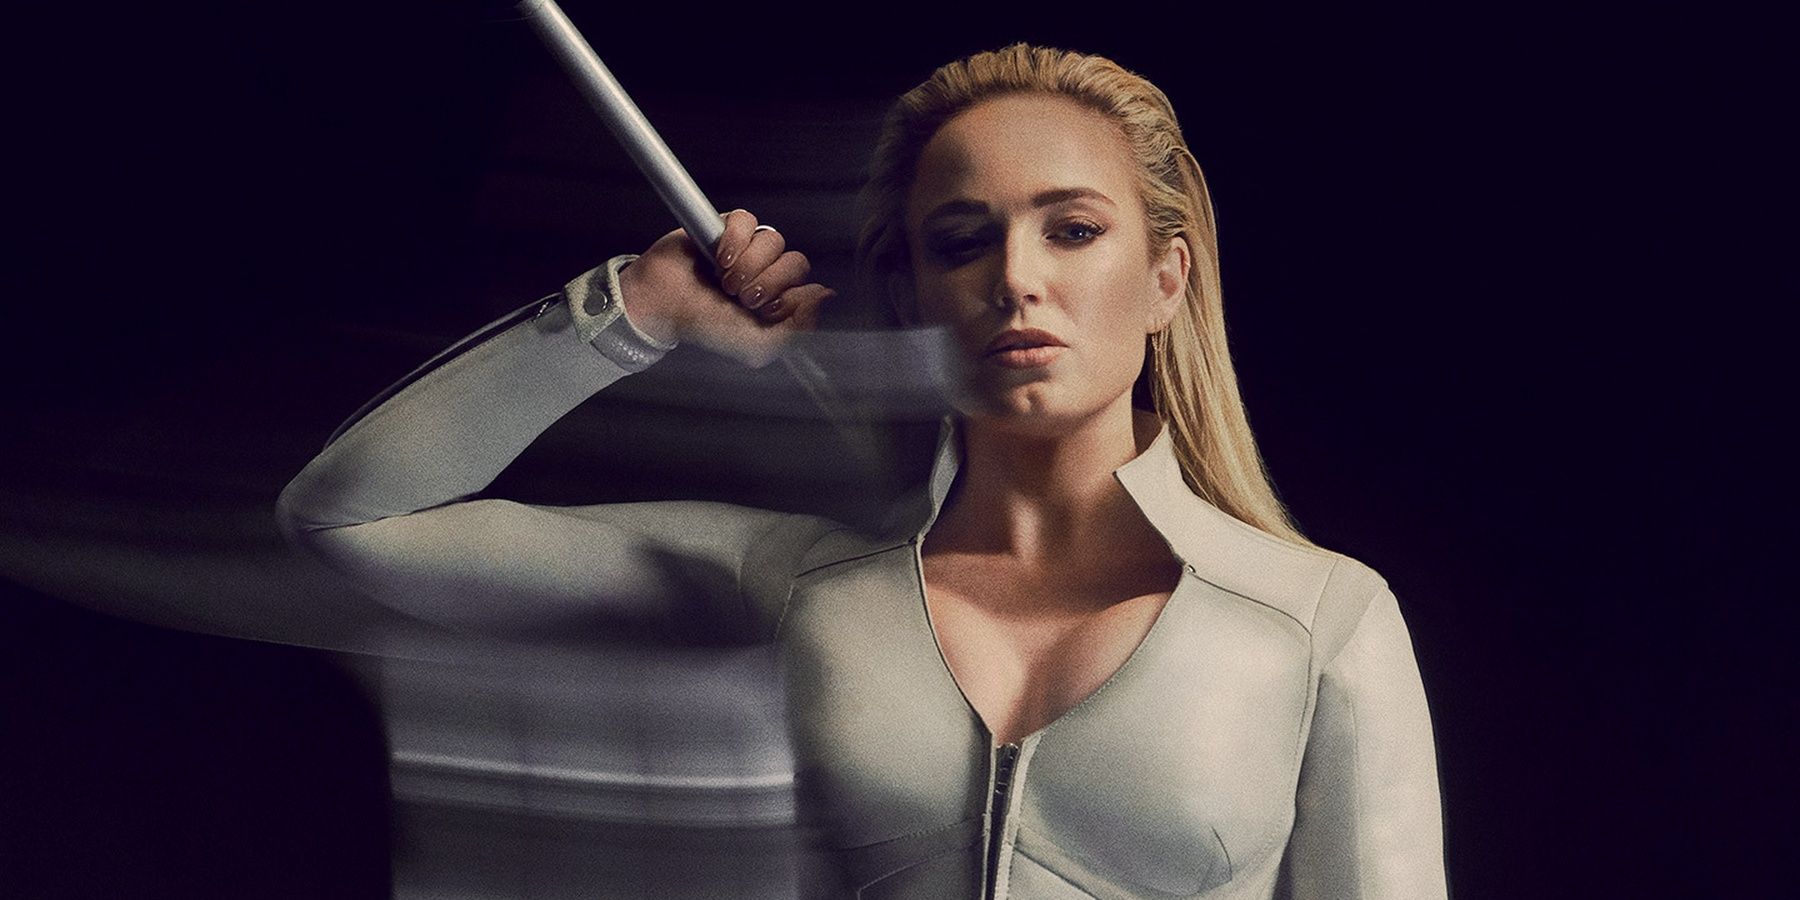 Caity Lotz as Sara Lance/White Canary in Legends of Tomorrow.